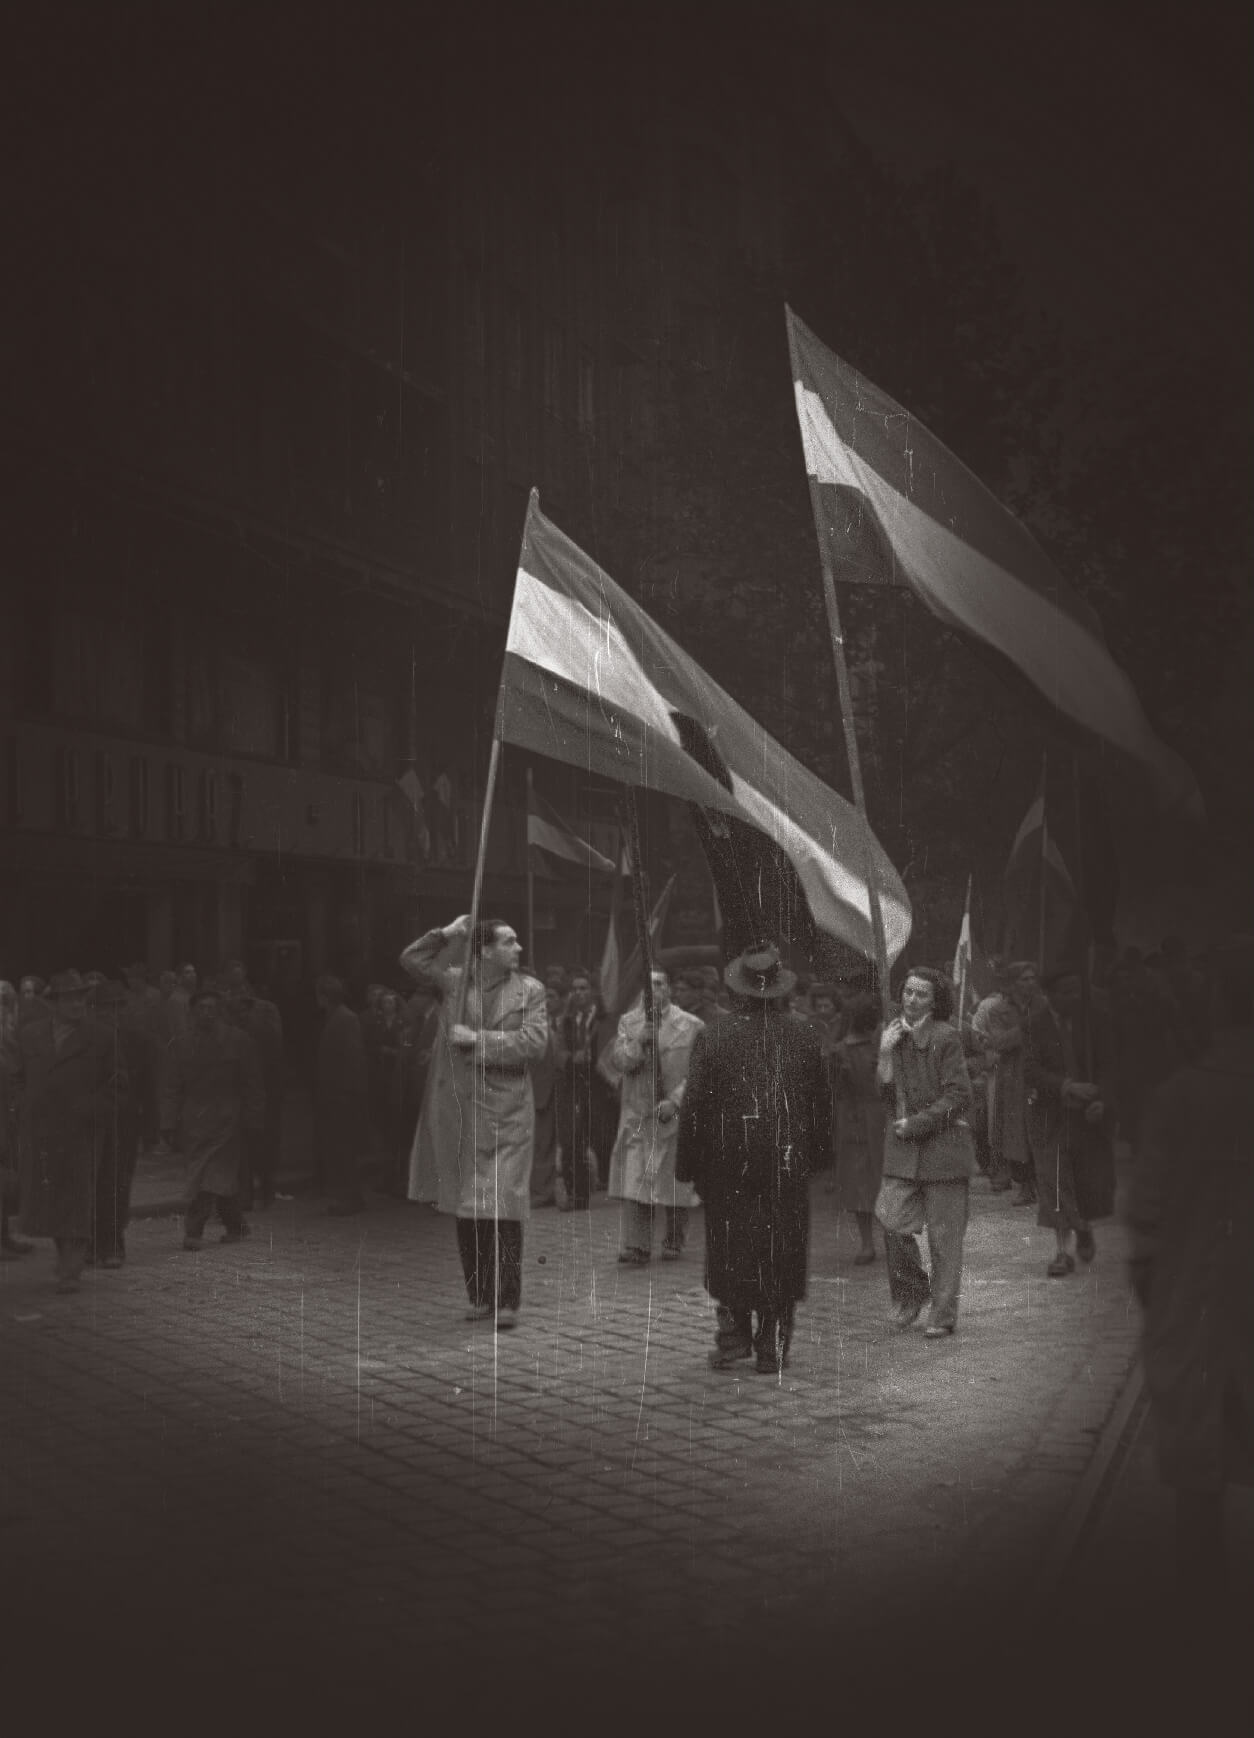 Carrying flags during the 1956 Hungarian Revolution